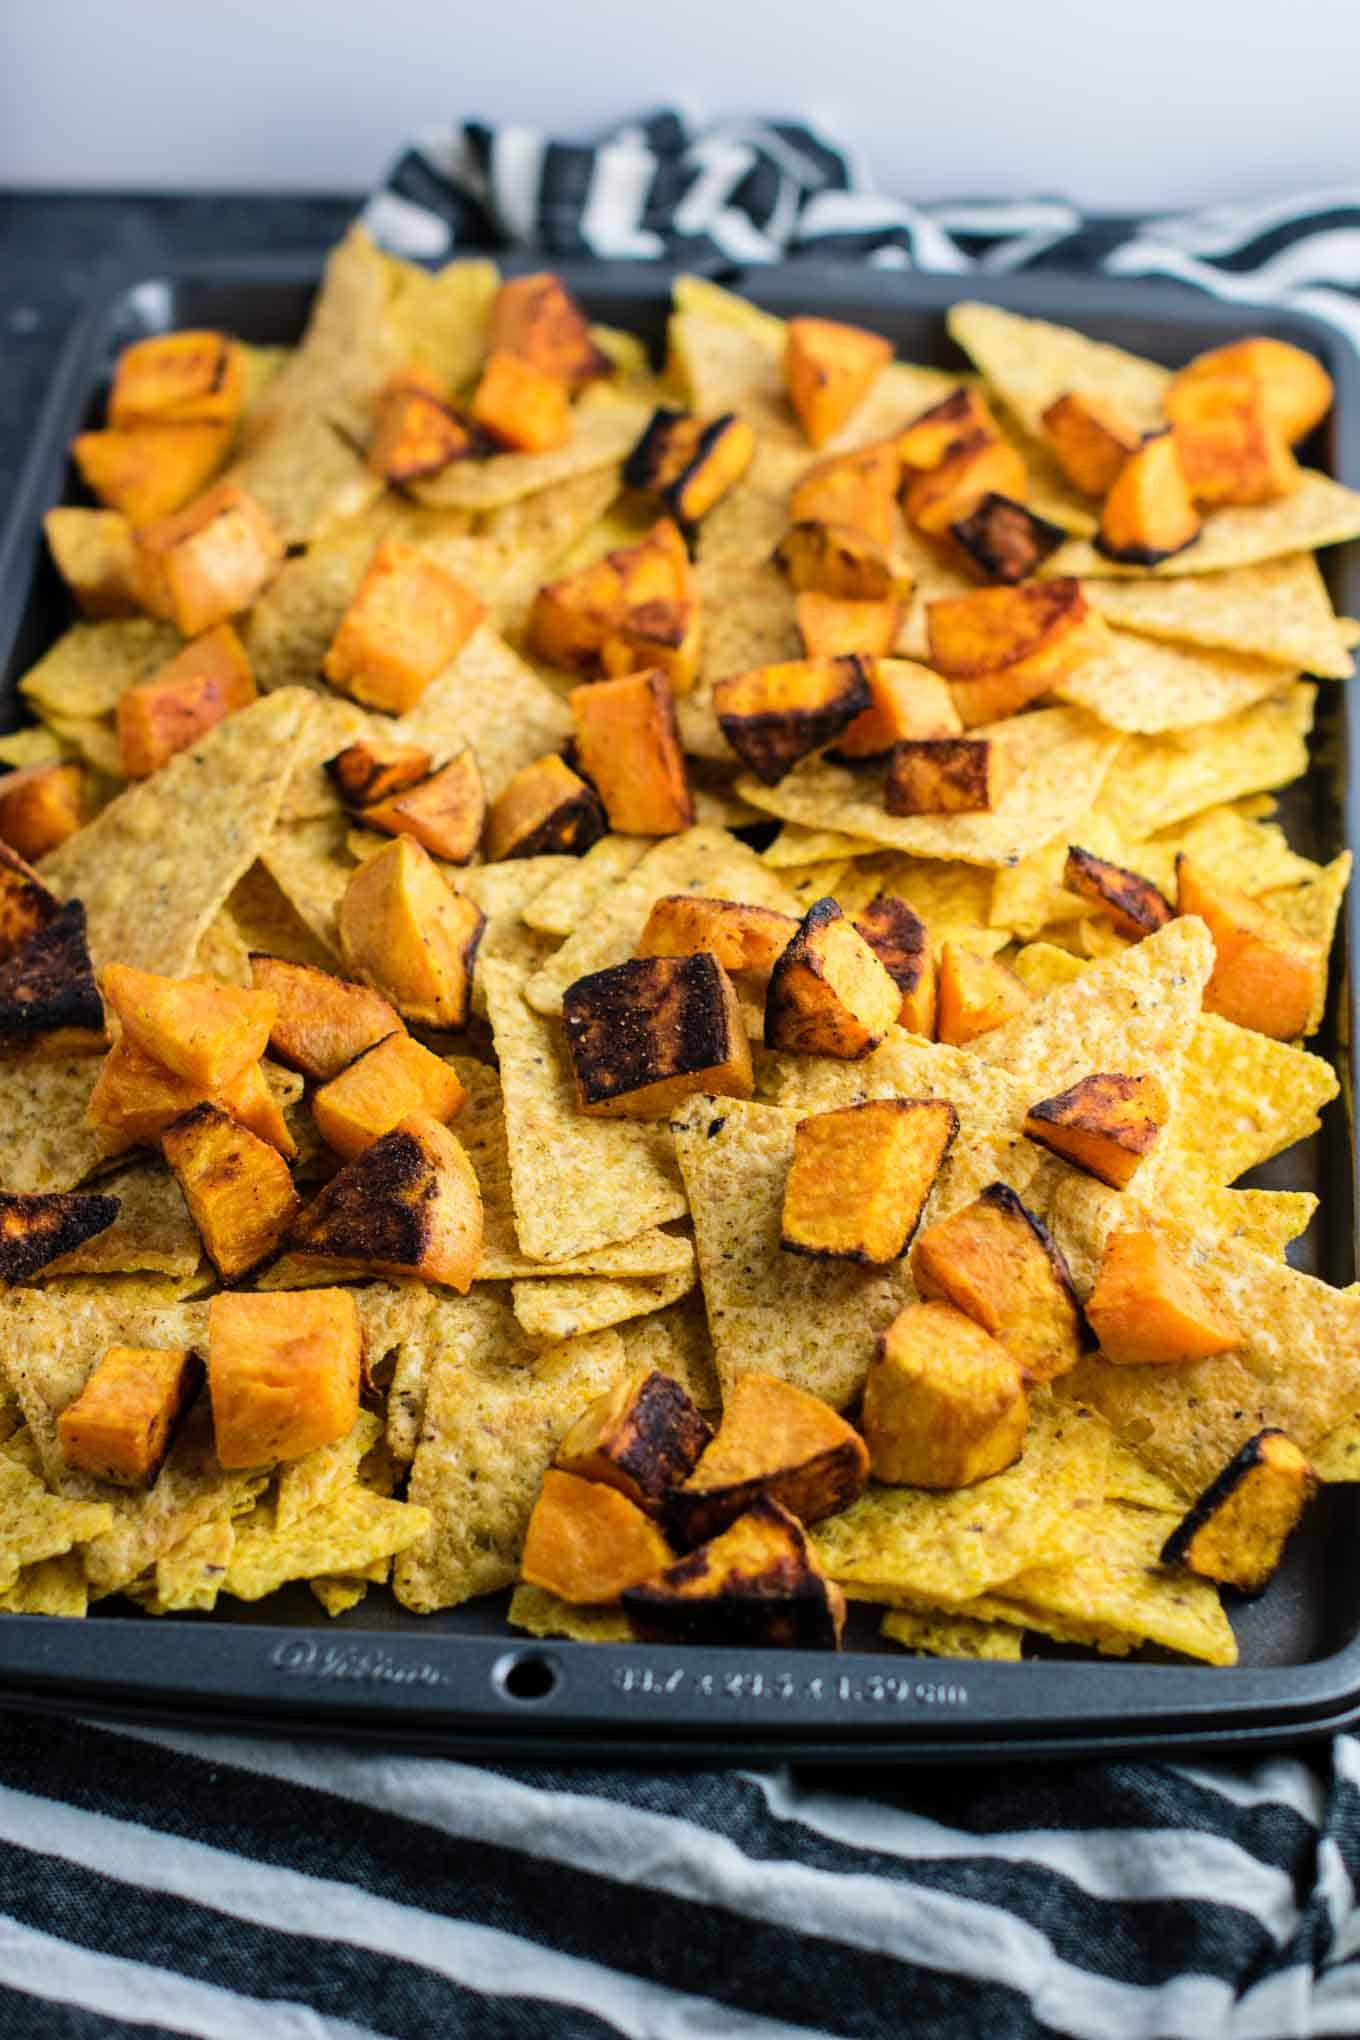 30 minute sweet potato refried bean nachos with homemade refried beans and cheese sauce. An impressive vegetarian dinner made in less than half an hour! #vegetarian #sweetpotatonachos #30minutemeal